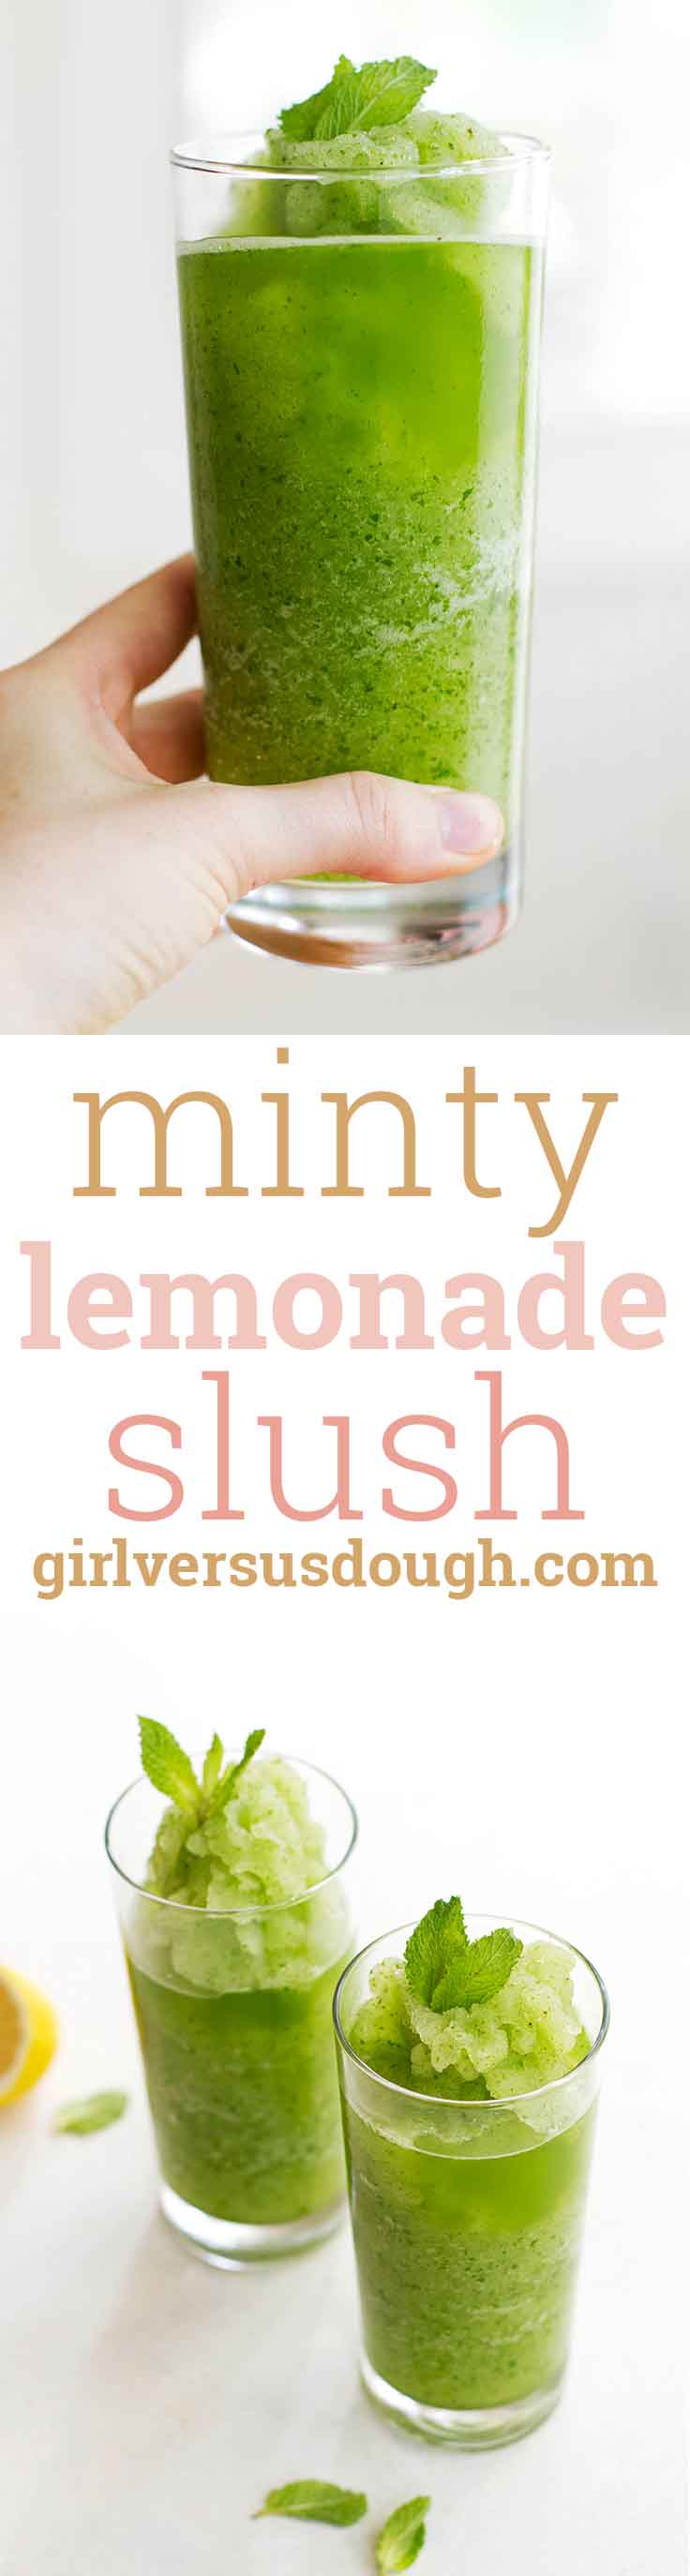 Minty Lemonade Slush -- a refreshing combination of fresh mint, lemon juice, simple syrup and ice makes up this delicious drink. girlversusdough.com @girlversusdough